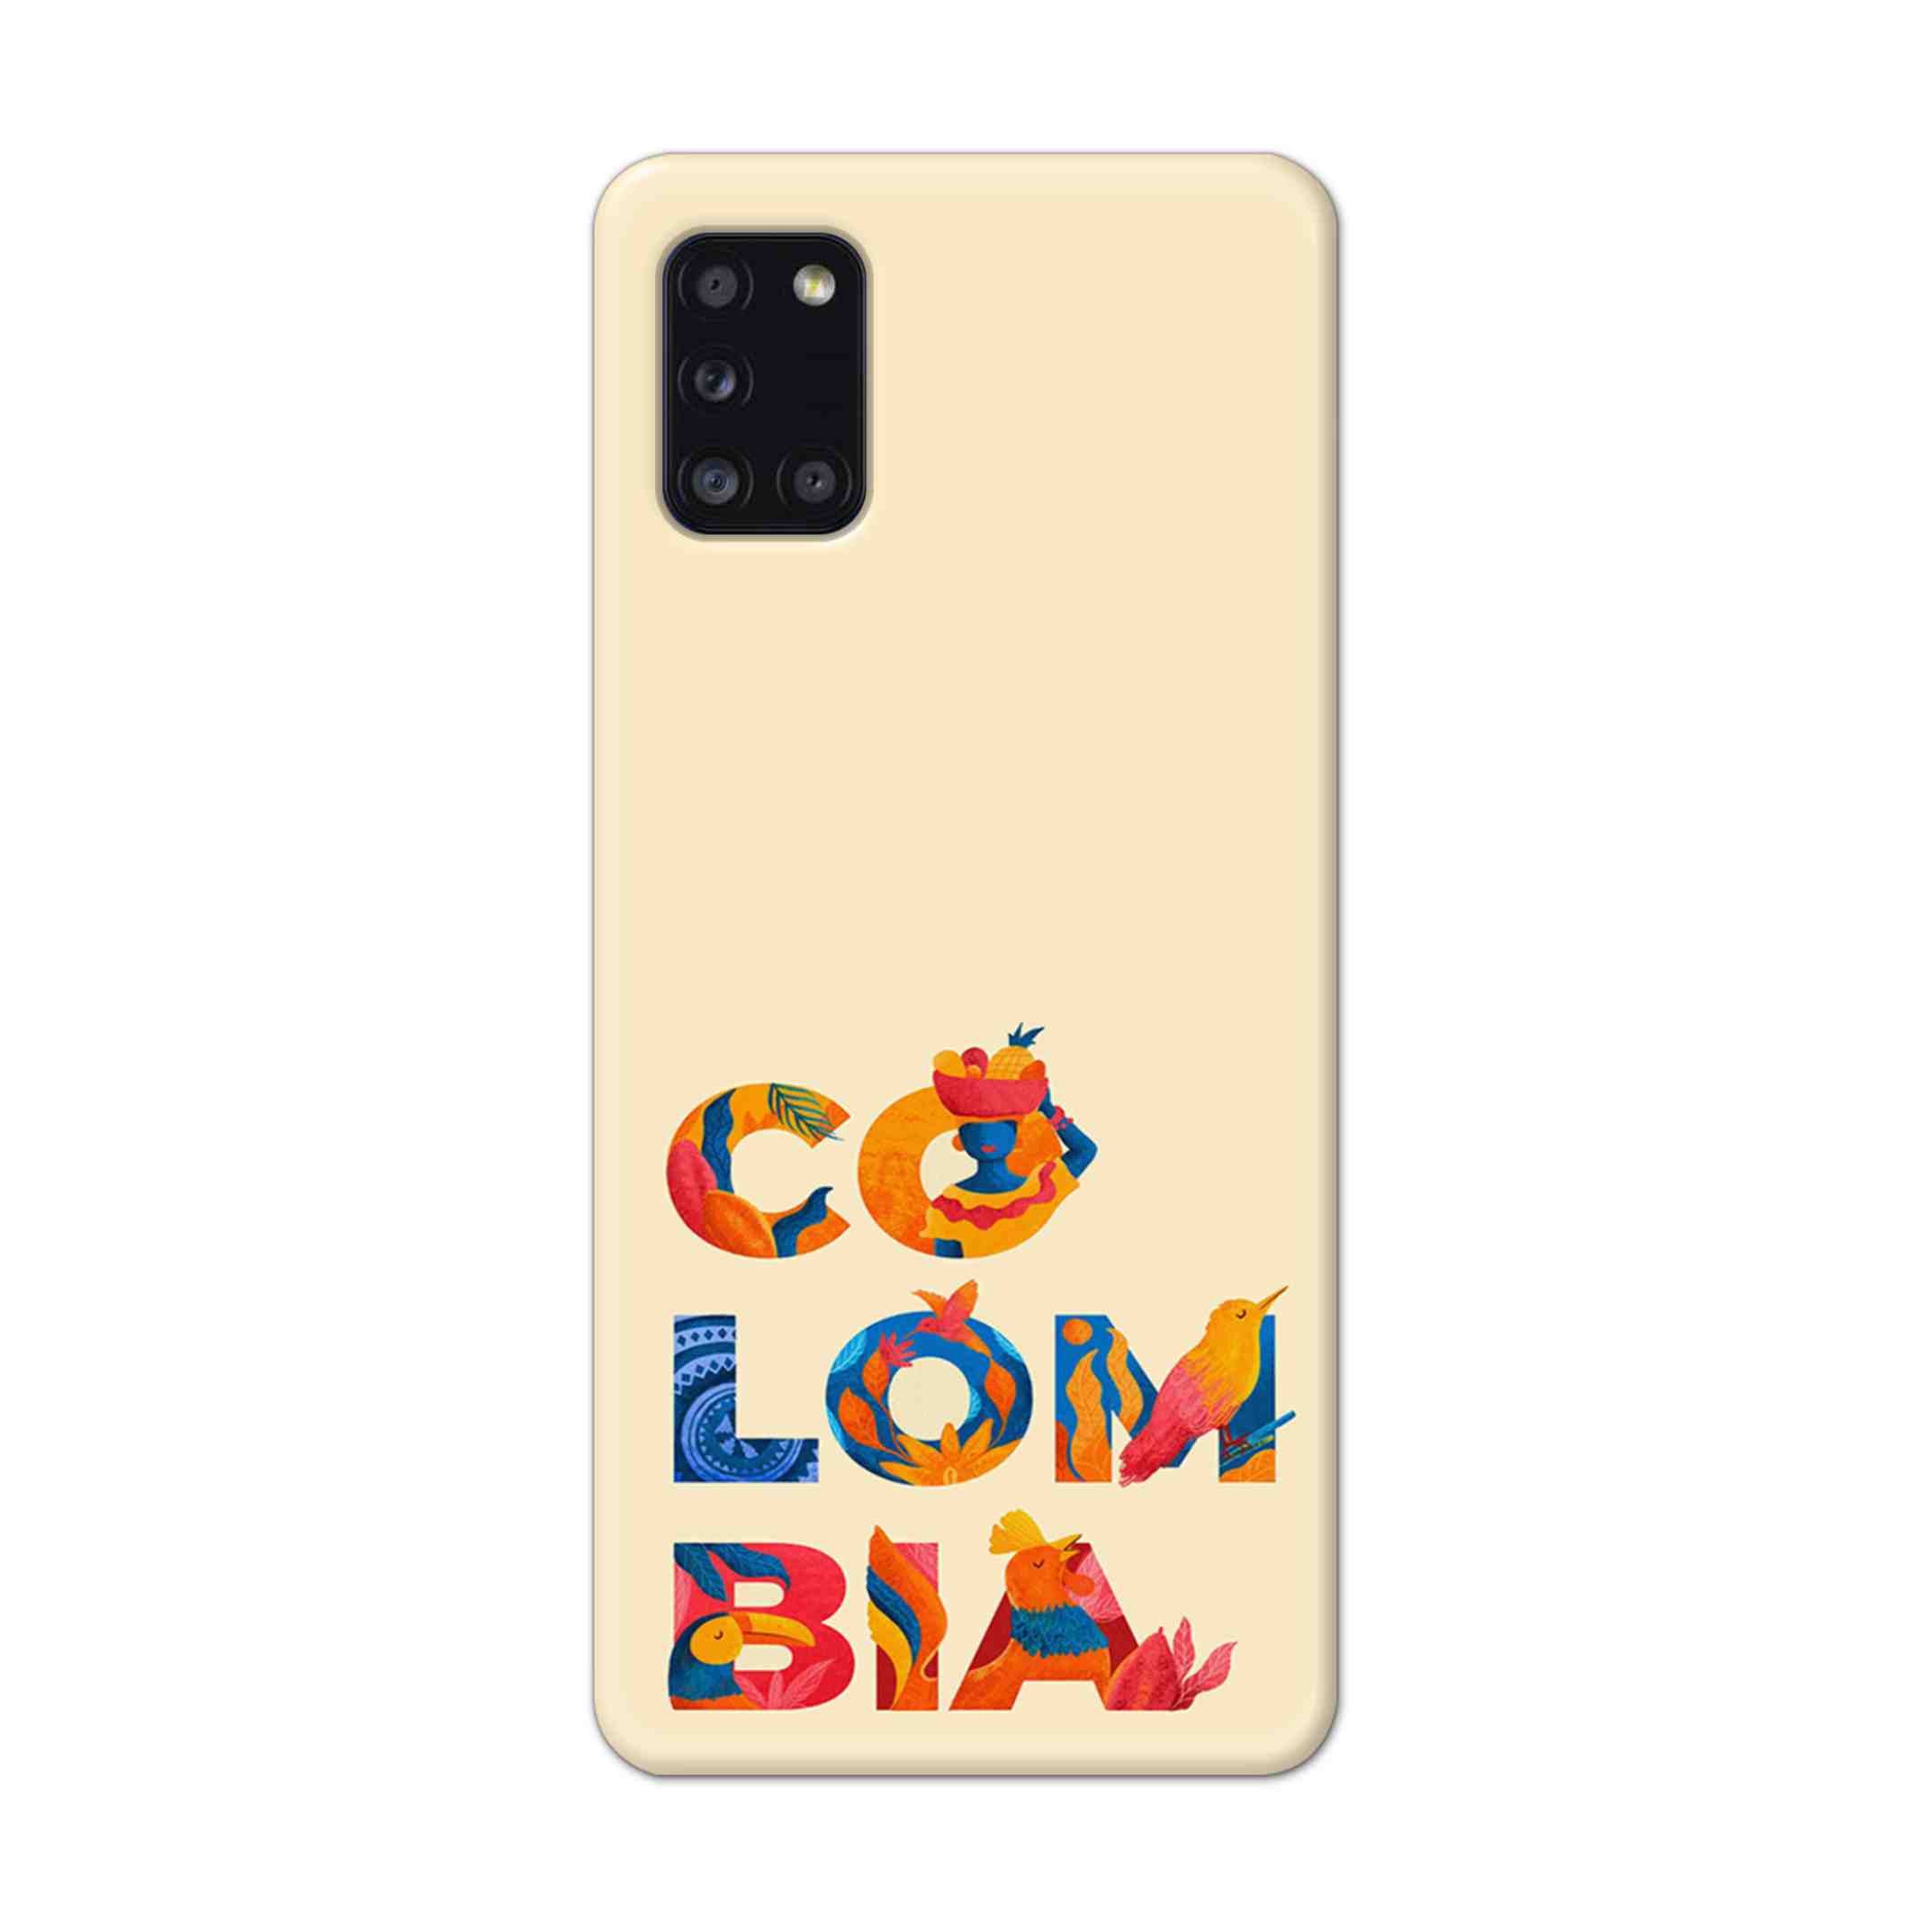 Buy Colombia Hard Back Mobile Phone Case Cover For Samsung Galaxy A31 Online